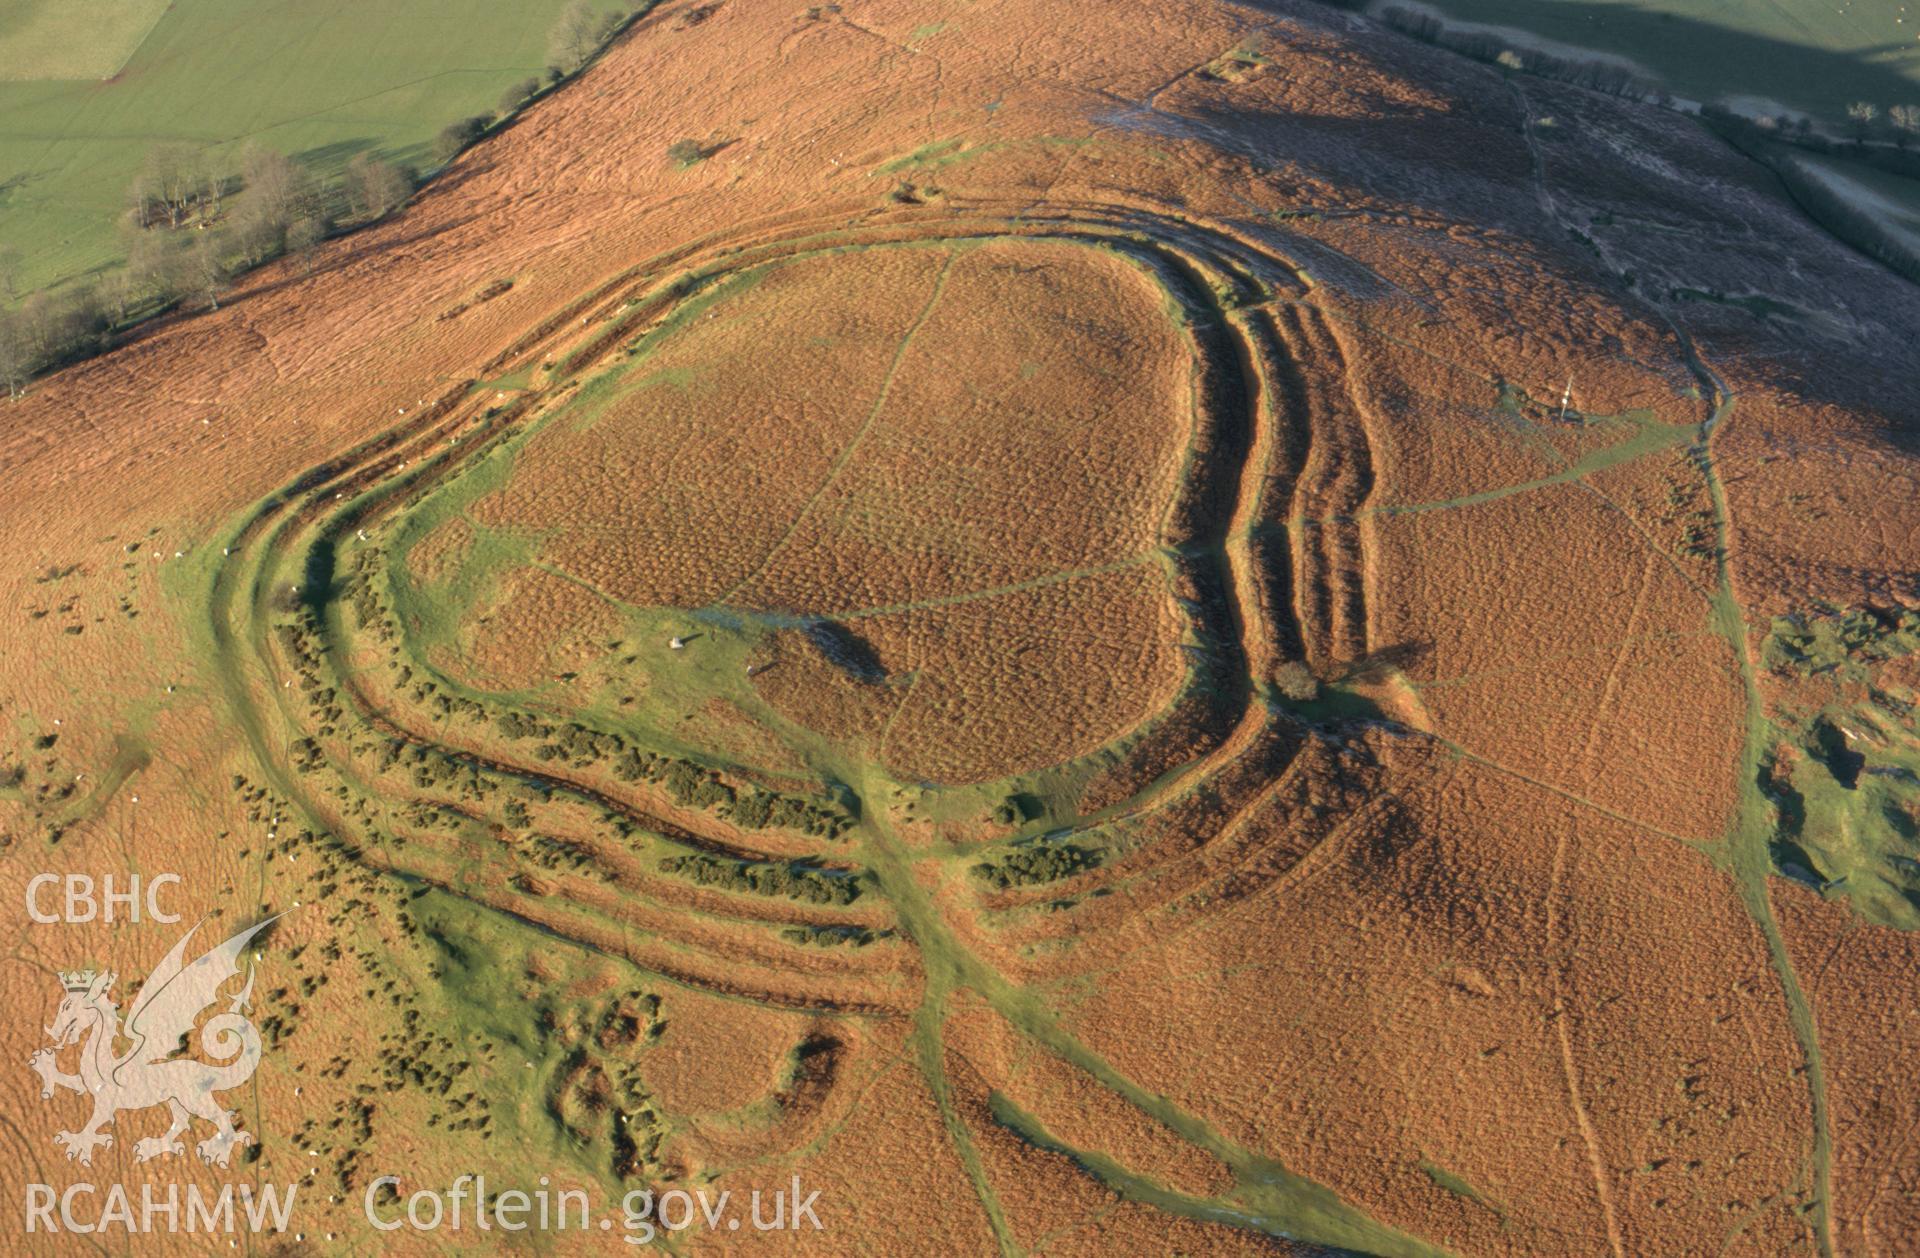 RCAHMW colour slide oblique aerial photograph of Pen-y-crug, Yscir, taken on 22/01/1999 by Toby Driver